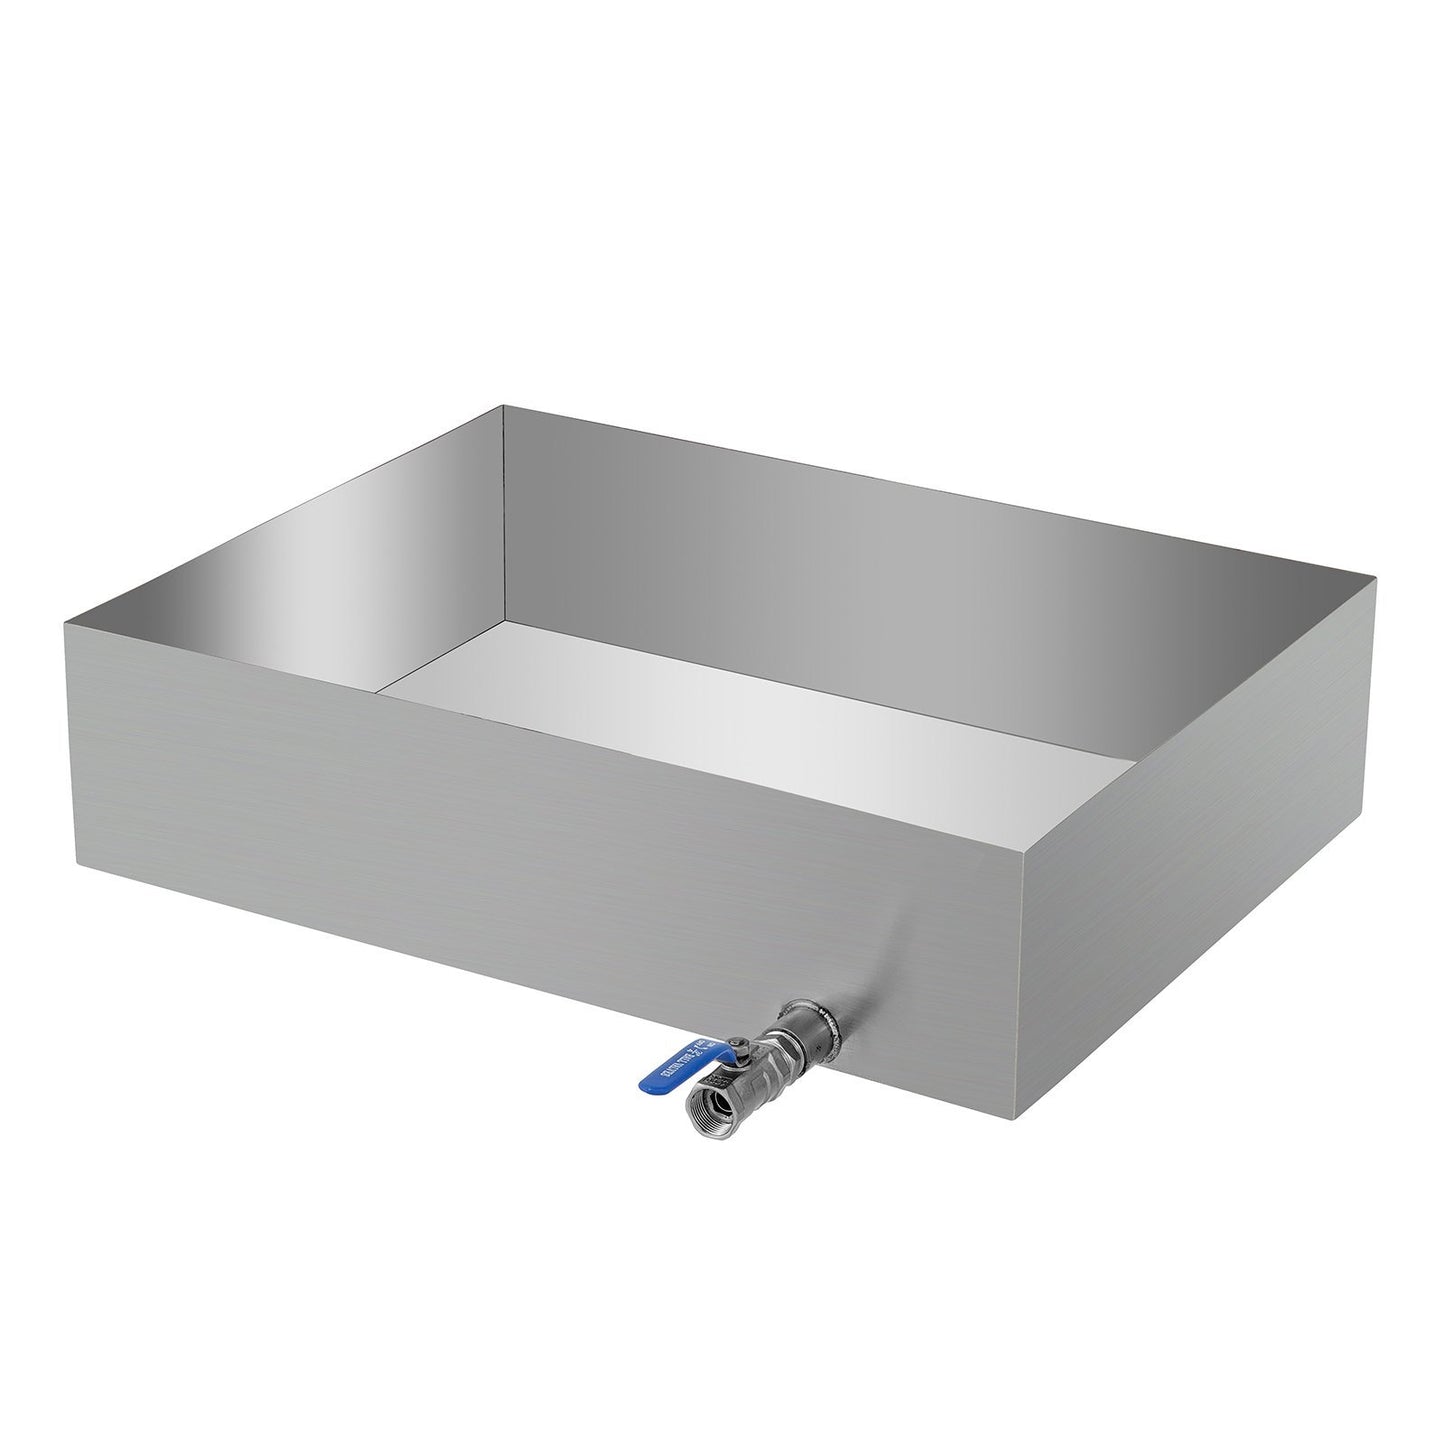 VEVOR Maple Syrup Evaporator Pan 24x18x6 Inch Stainless Steel Maple Syrup Boiling Pan for Boiling Maple Syrup